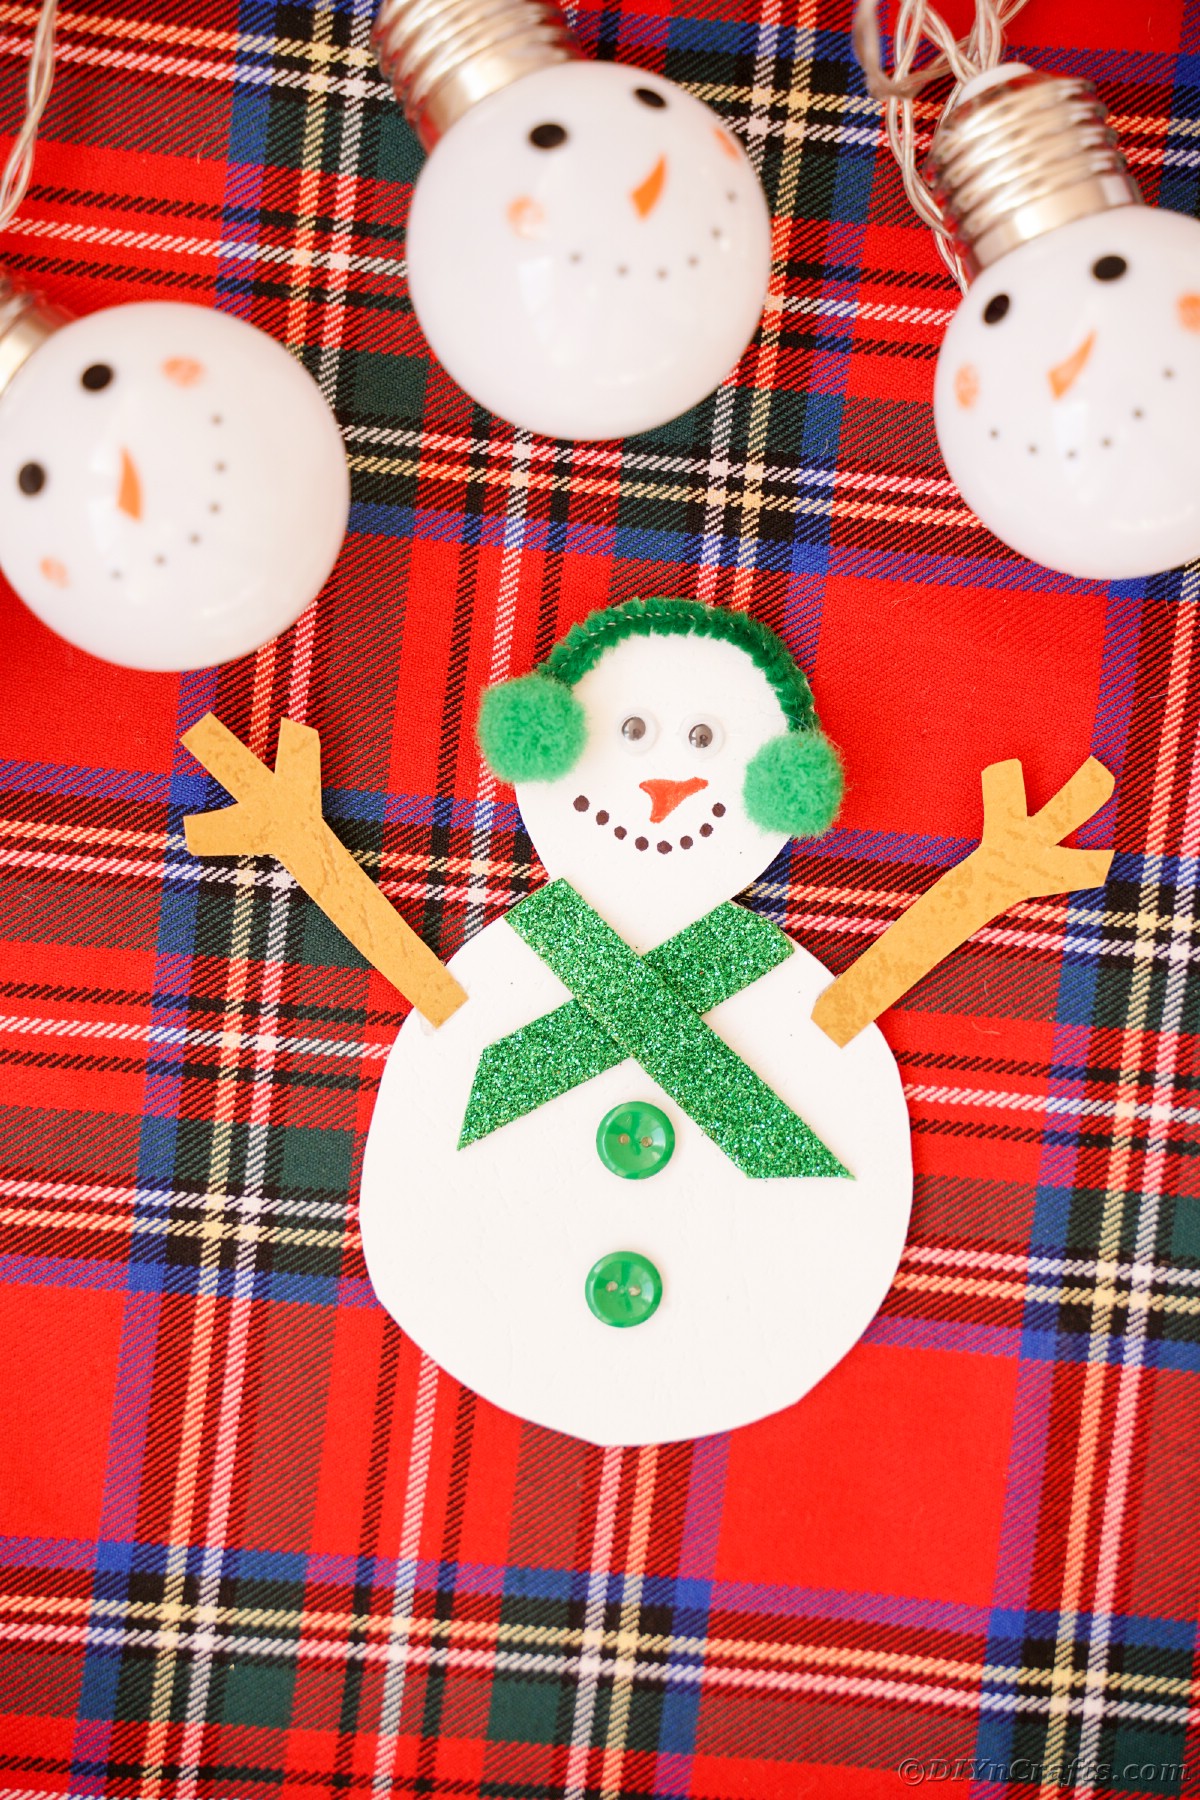 paper snowman on plaid surface with snowman lights